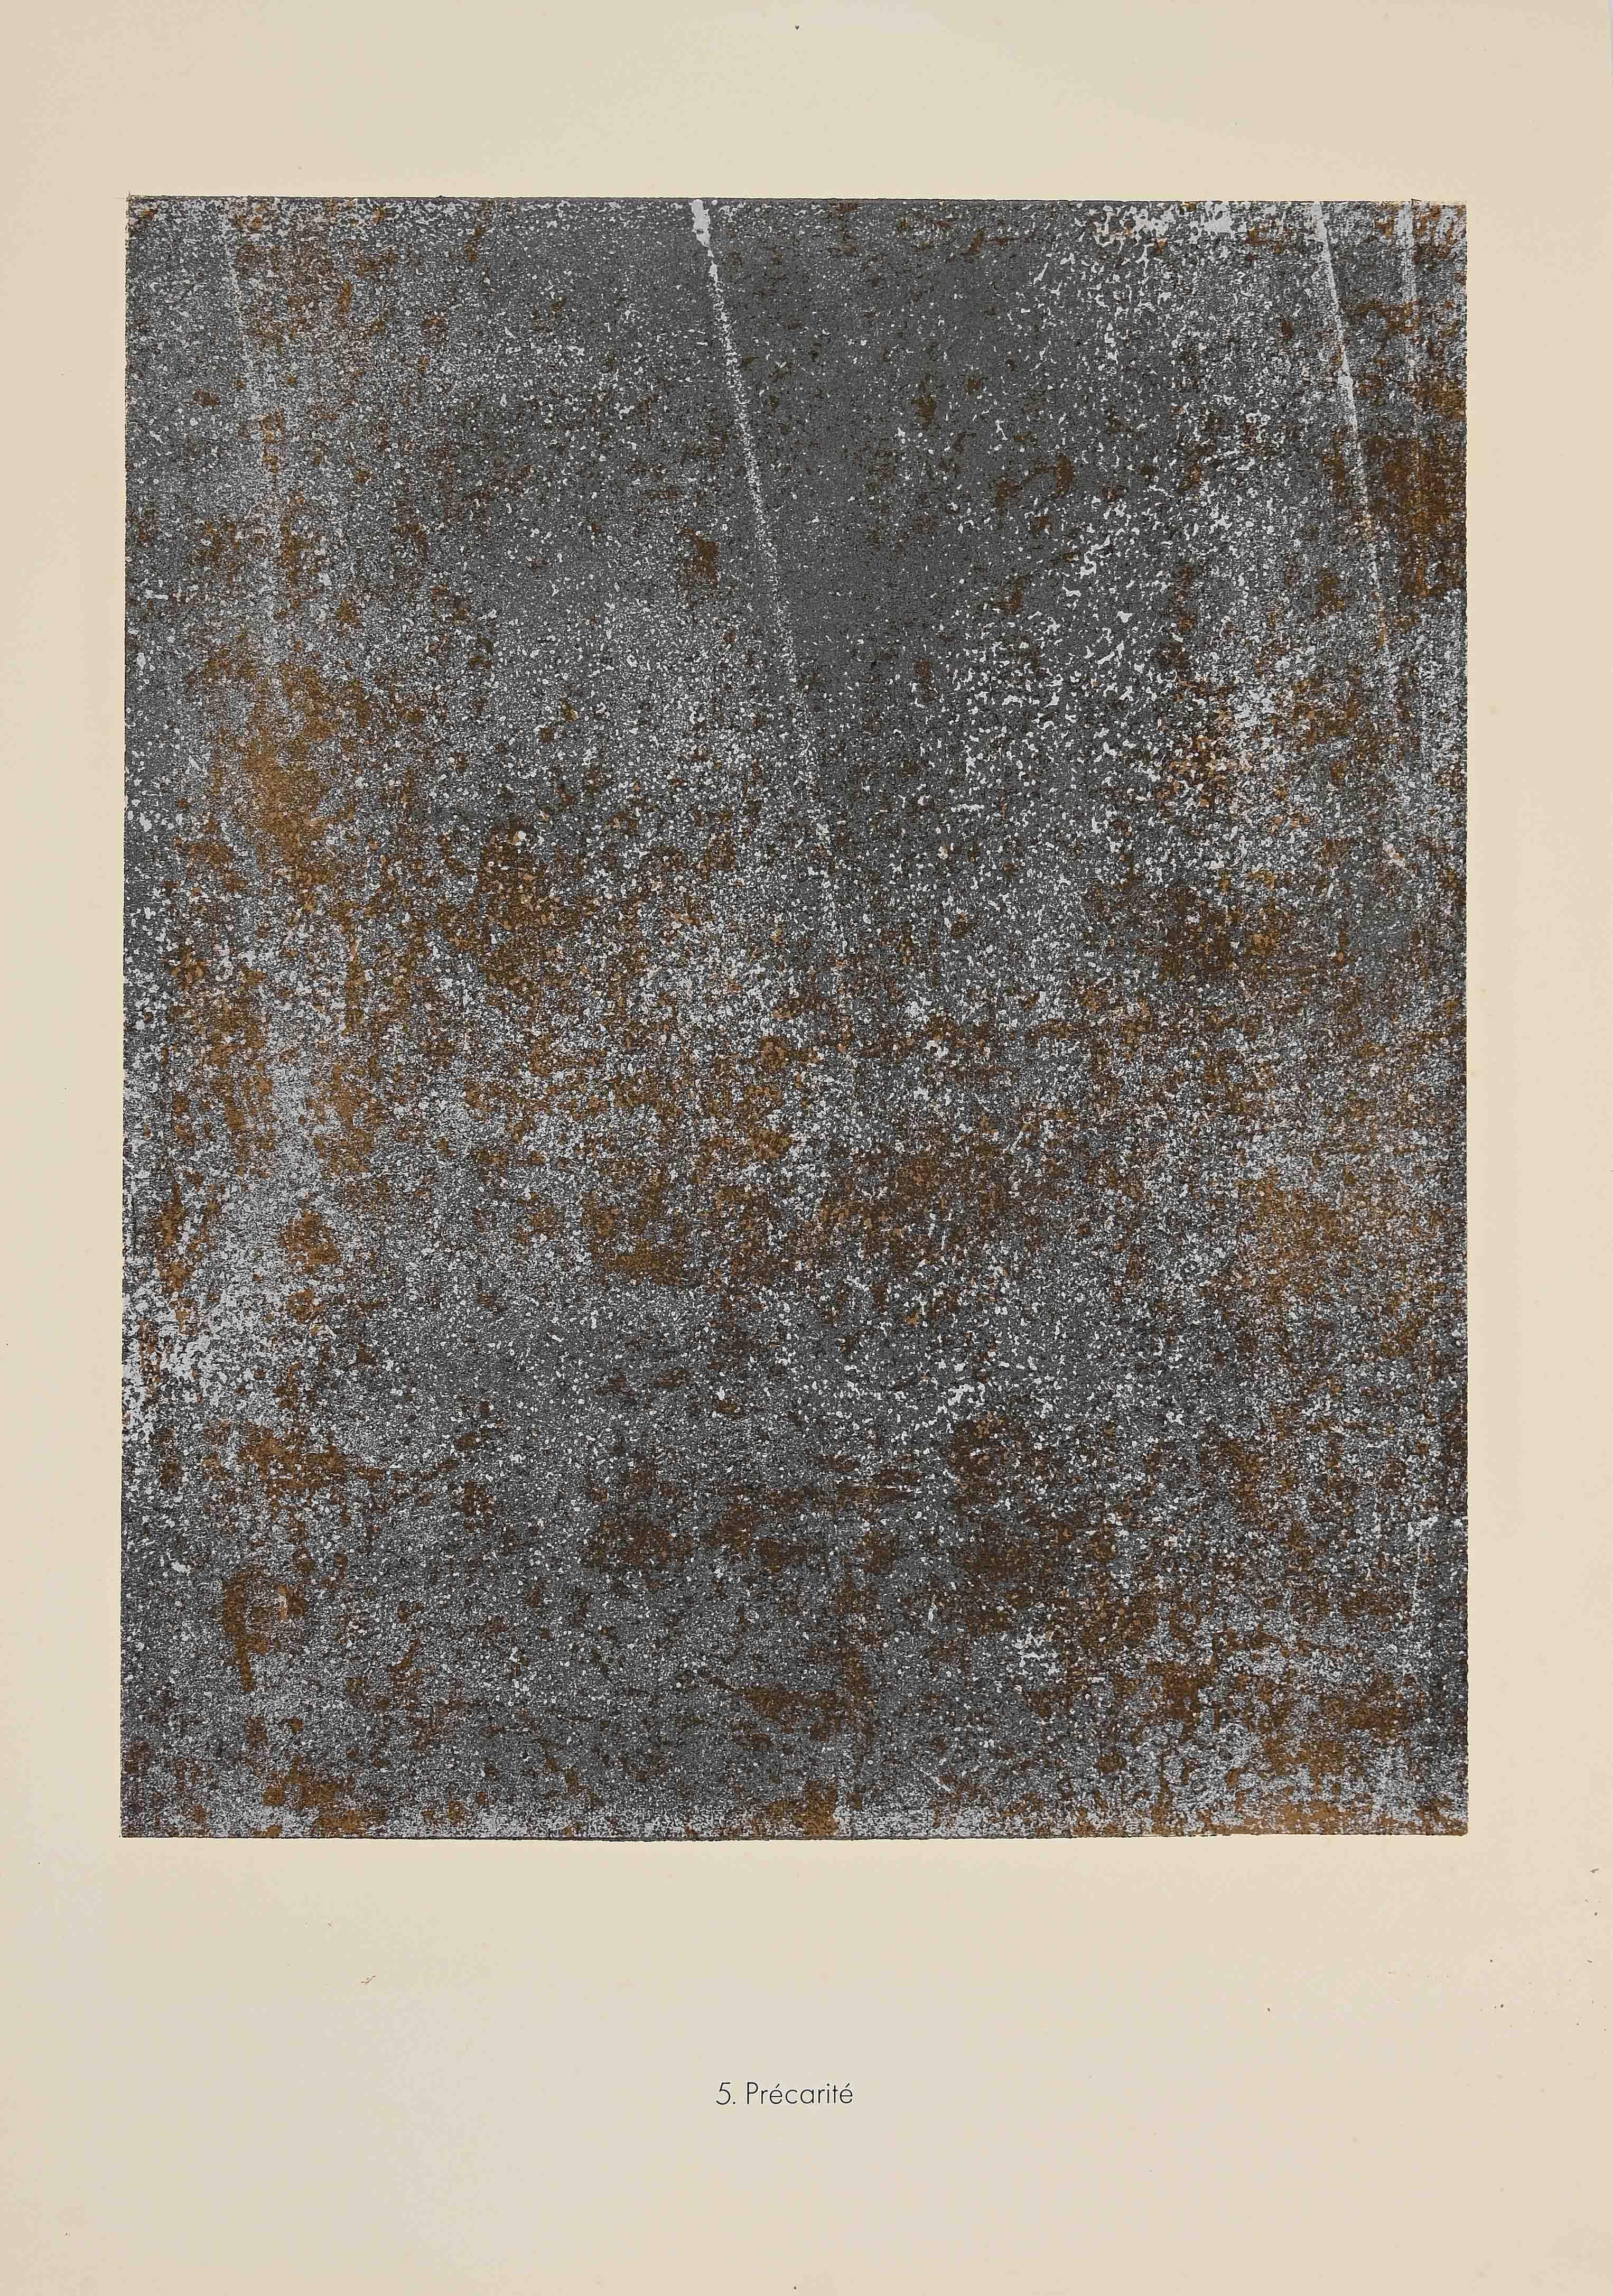 Precarite is an original lithograph on watermarked paper "Arc". Abstract composition by the French artist Jean Dubuffet. From the album of "Anarchitecte" (1953-1959). In excellent conditions.

Image Dimensions: 45 x 37 cm

Referements: Cat.